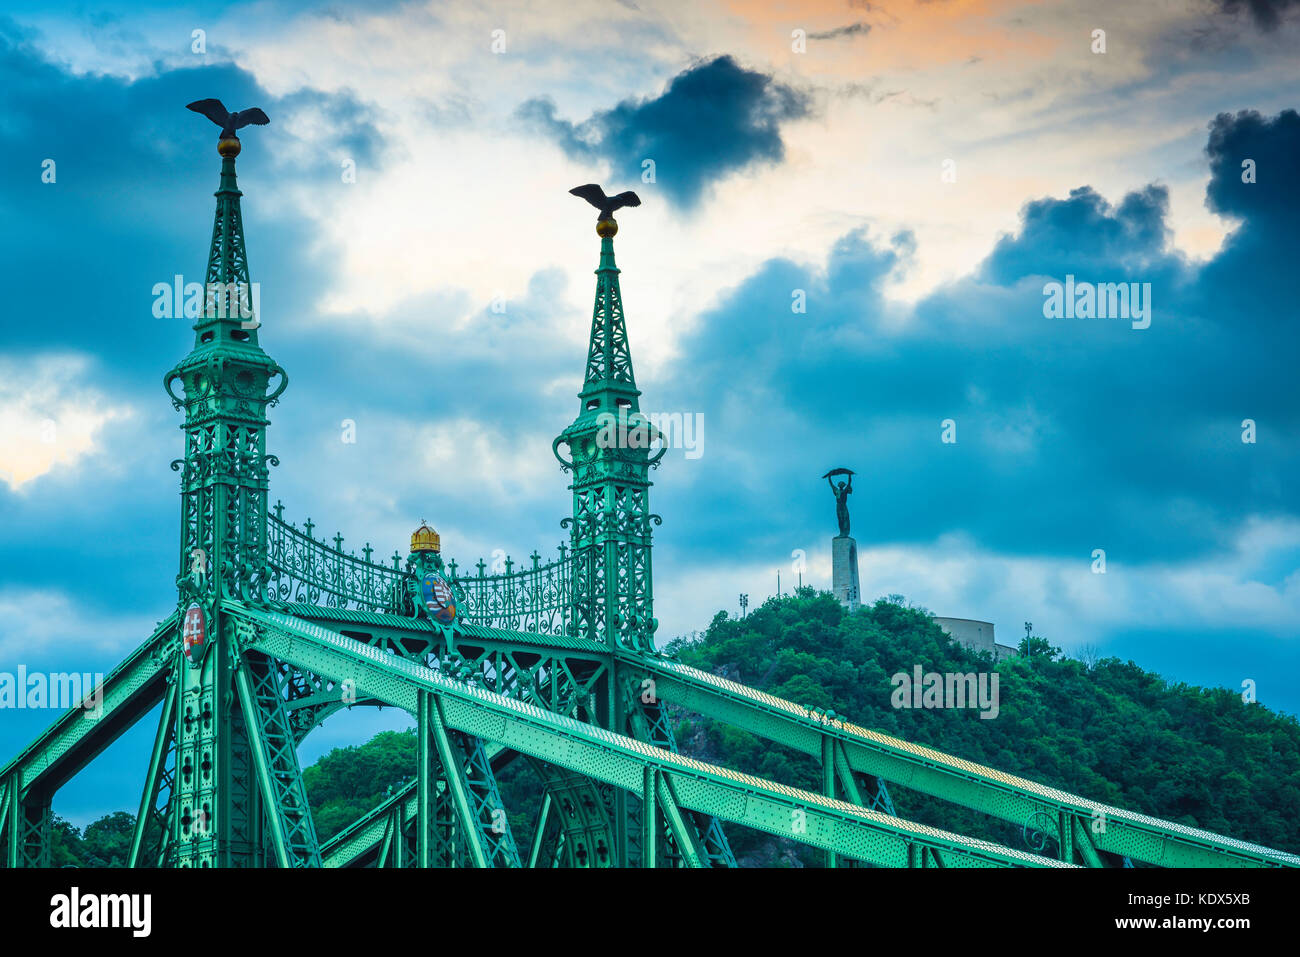 Budapest skyline, view of the eagle-topped towers of the Szabadsag Bridge and the Liberation Monument on top of Gellert Hegy (hill), Budapest. Stock Photo